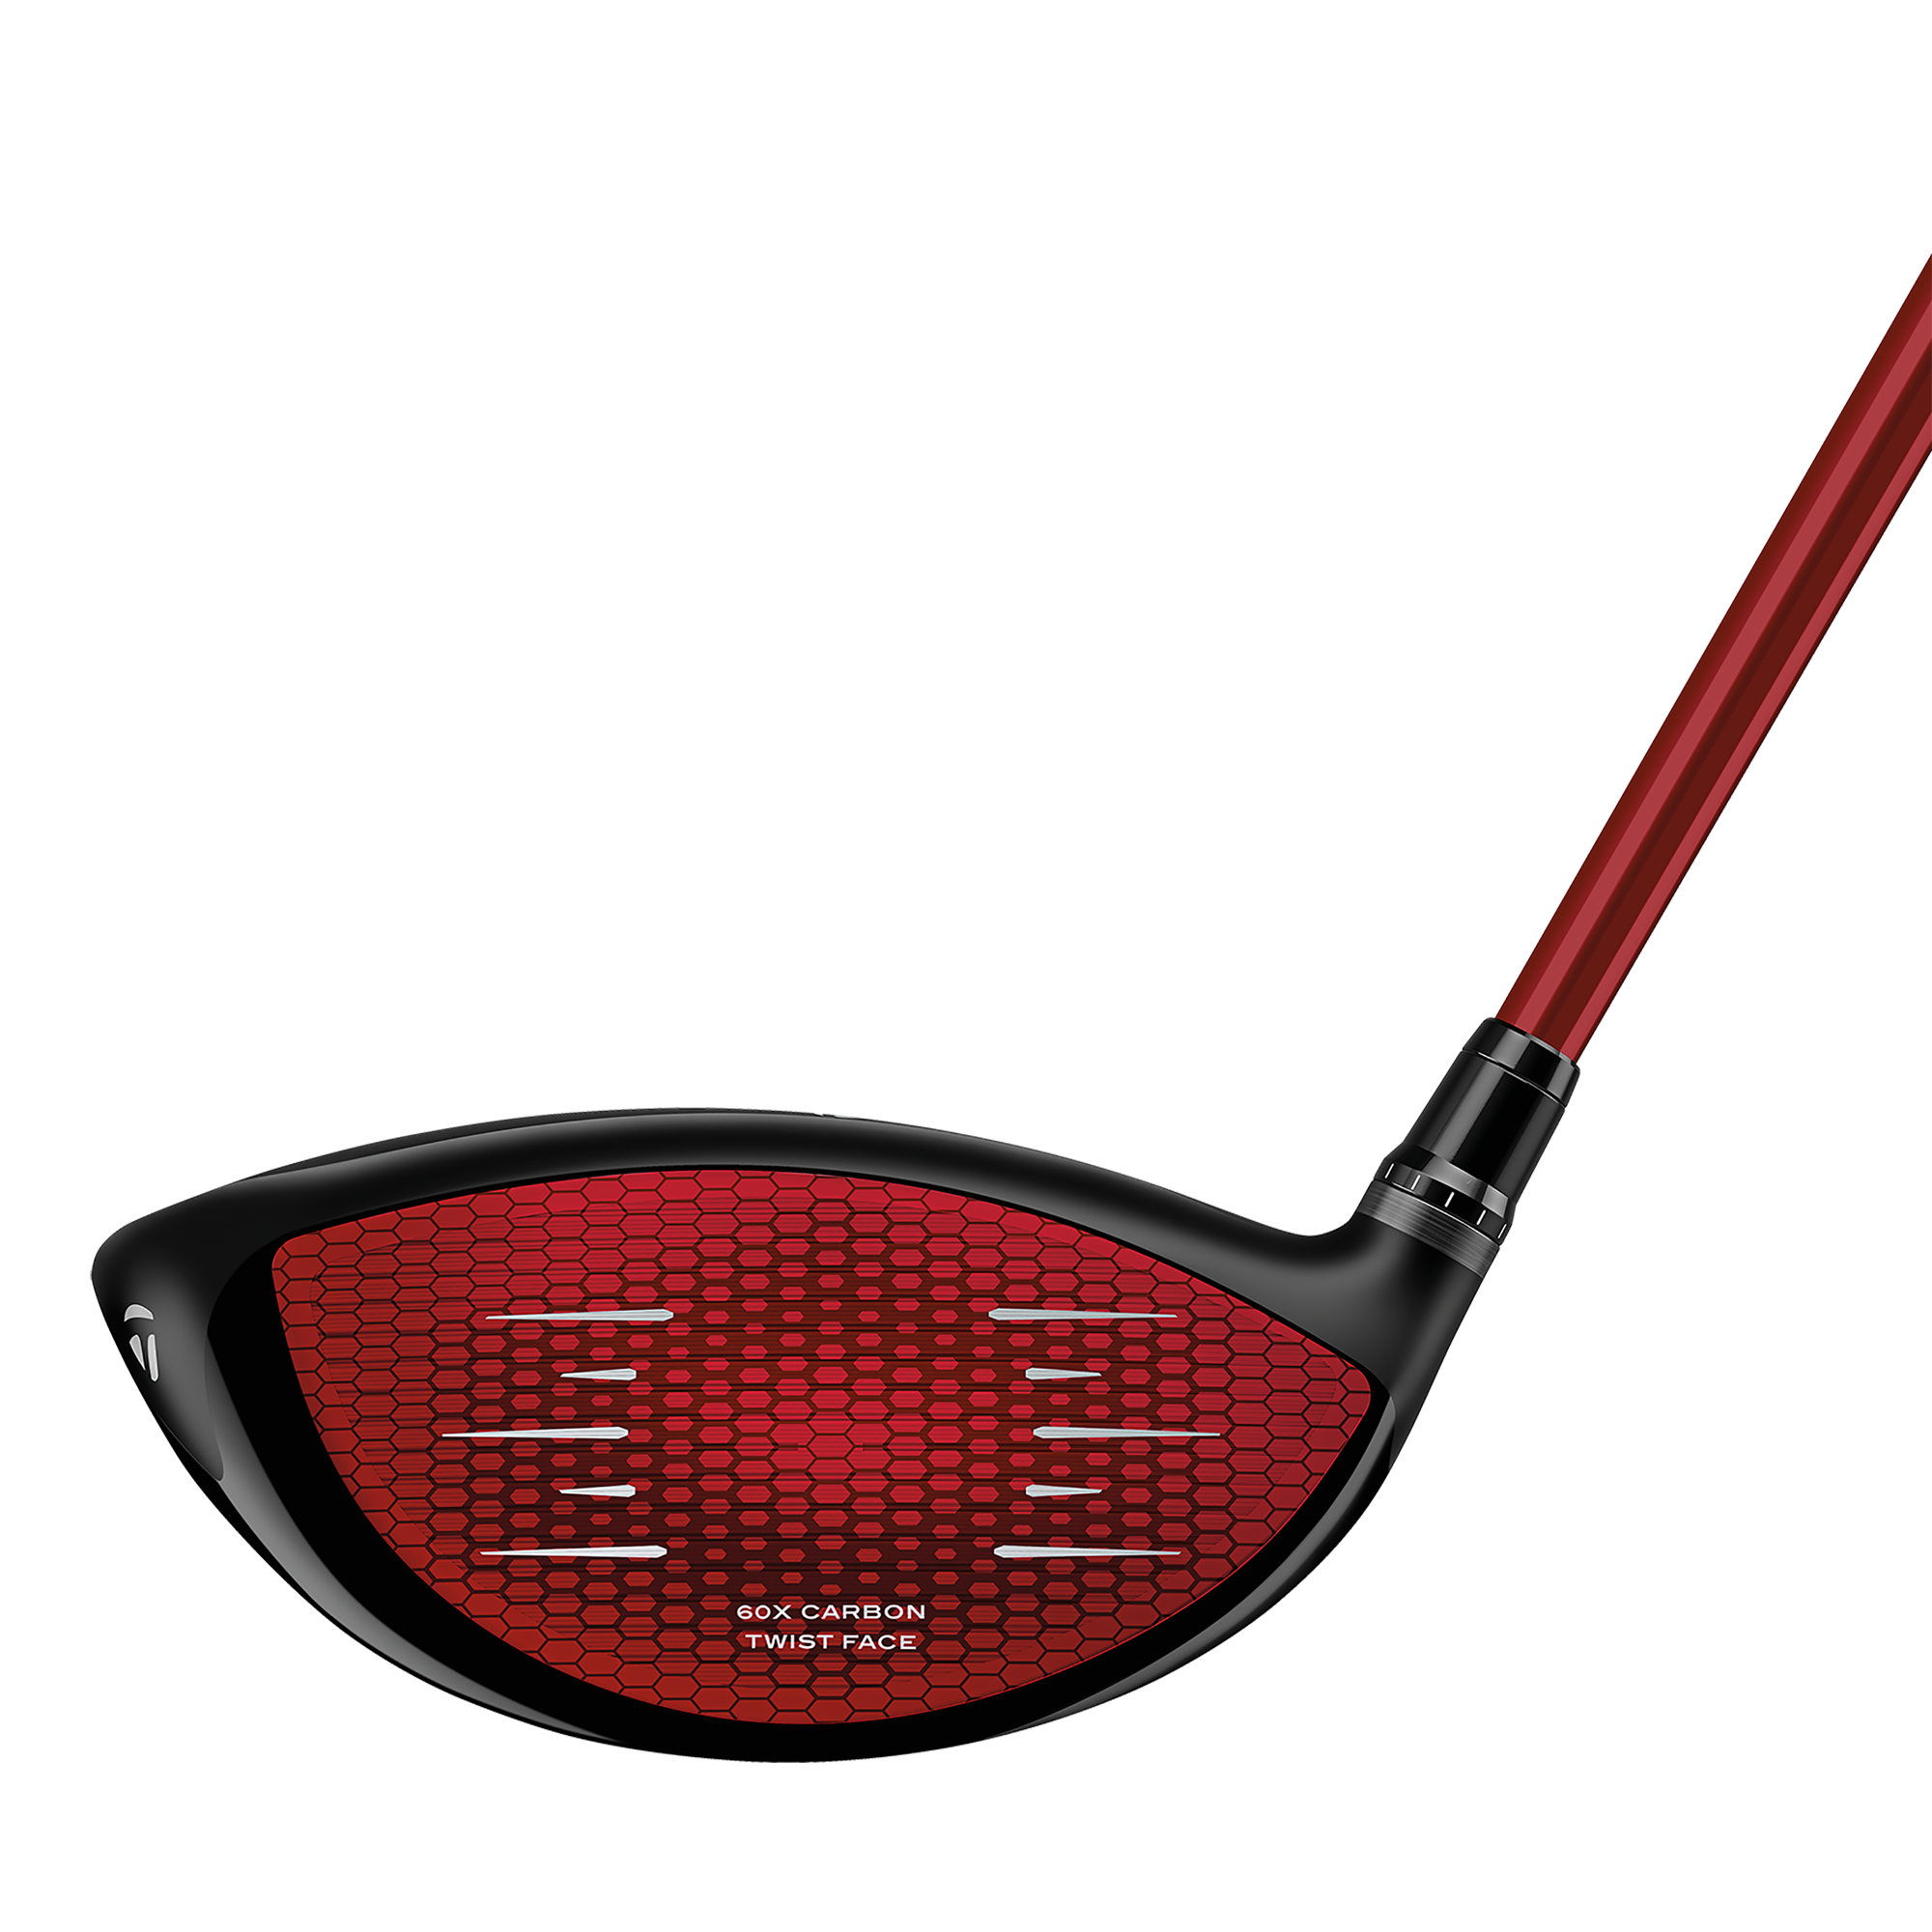 Stealth 2 High Draw Driver